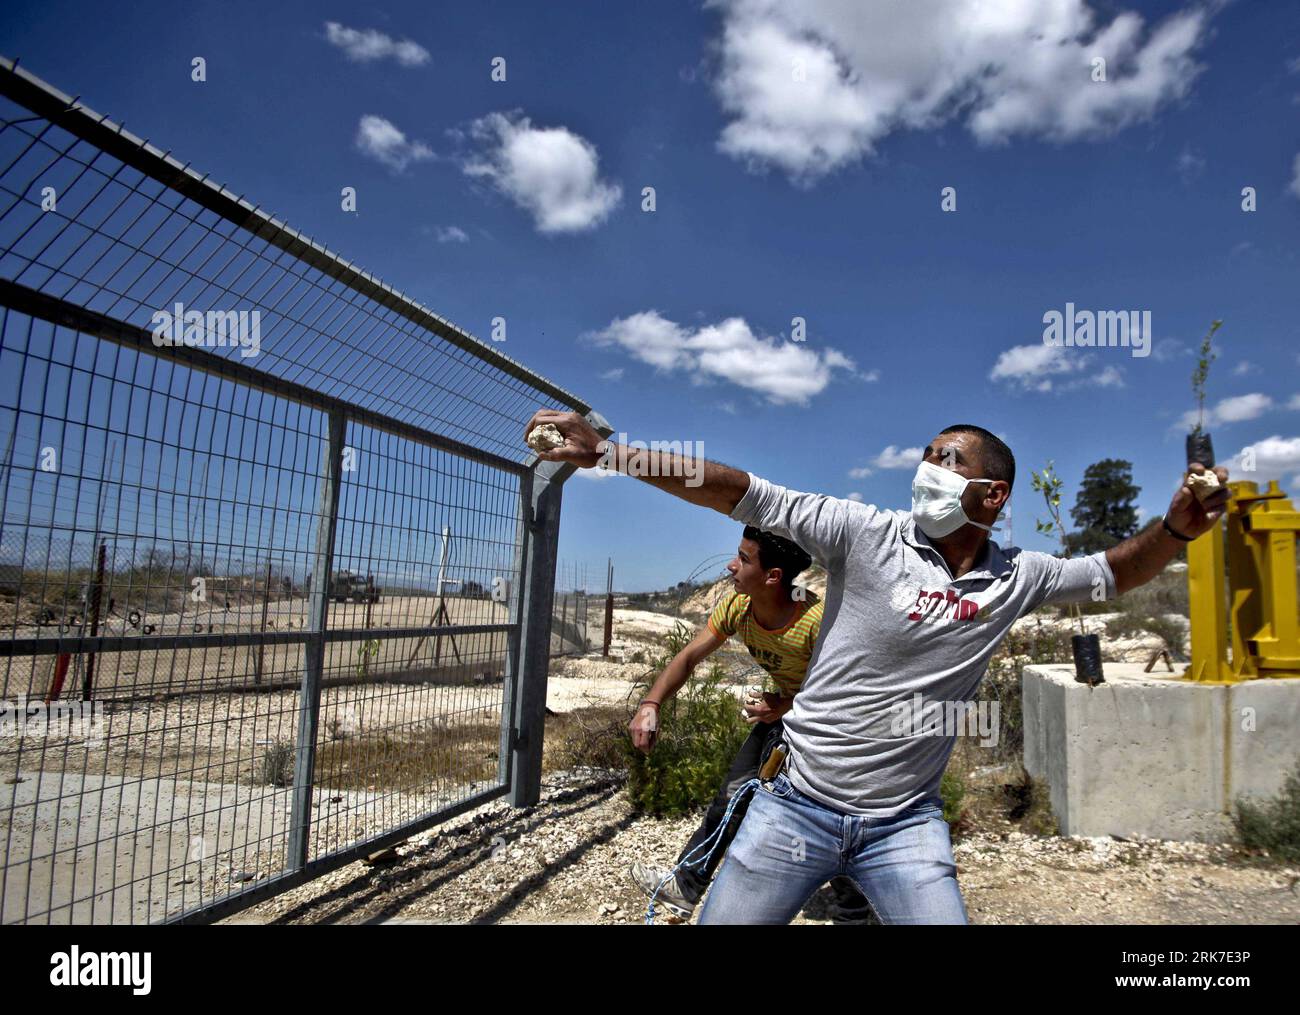 Bildnummer: 53905671  Datum: 30.03.2010  Copyright: imago/Xinhua (100330)-- RAMALLAH, March 30, 2010 (Xinhua) -- A Palestinian protester hurls stones at Israeli soldiers during a demonstration marking land day and against the Israeli separation barrier in the West Bank village of Bodros near Ramallah on March 30, 2010. March 30 marks Land Day, the annual commemoration of protests in 1976 against Israel s appropriation of Arab-owned land in the Galilee. (Xinhua/Fadi Arouri) (axy) (3)RAMALLAH-ISRAEL-DEMONSTRATION PUBLICATIONxNOTxINxCHN Palästina Palästinenser Steinwurf Schleuder Wurfschleuder St Stock Photo